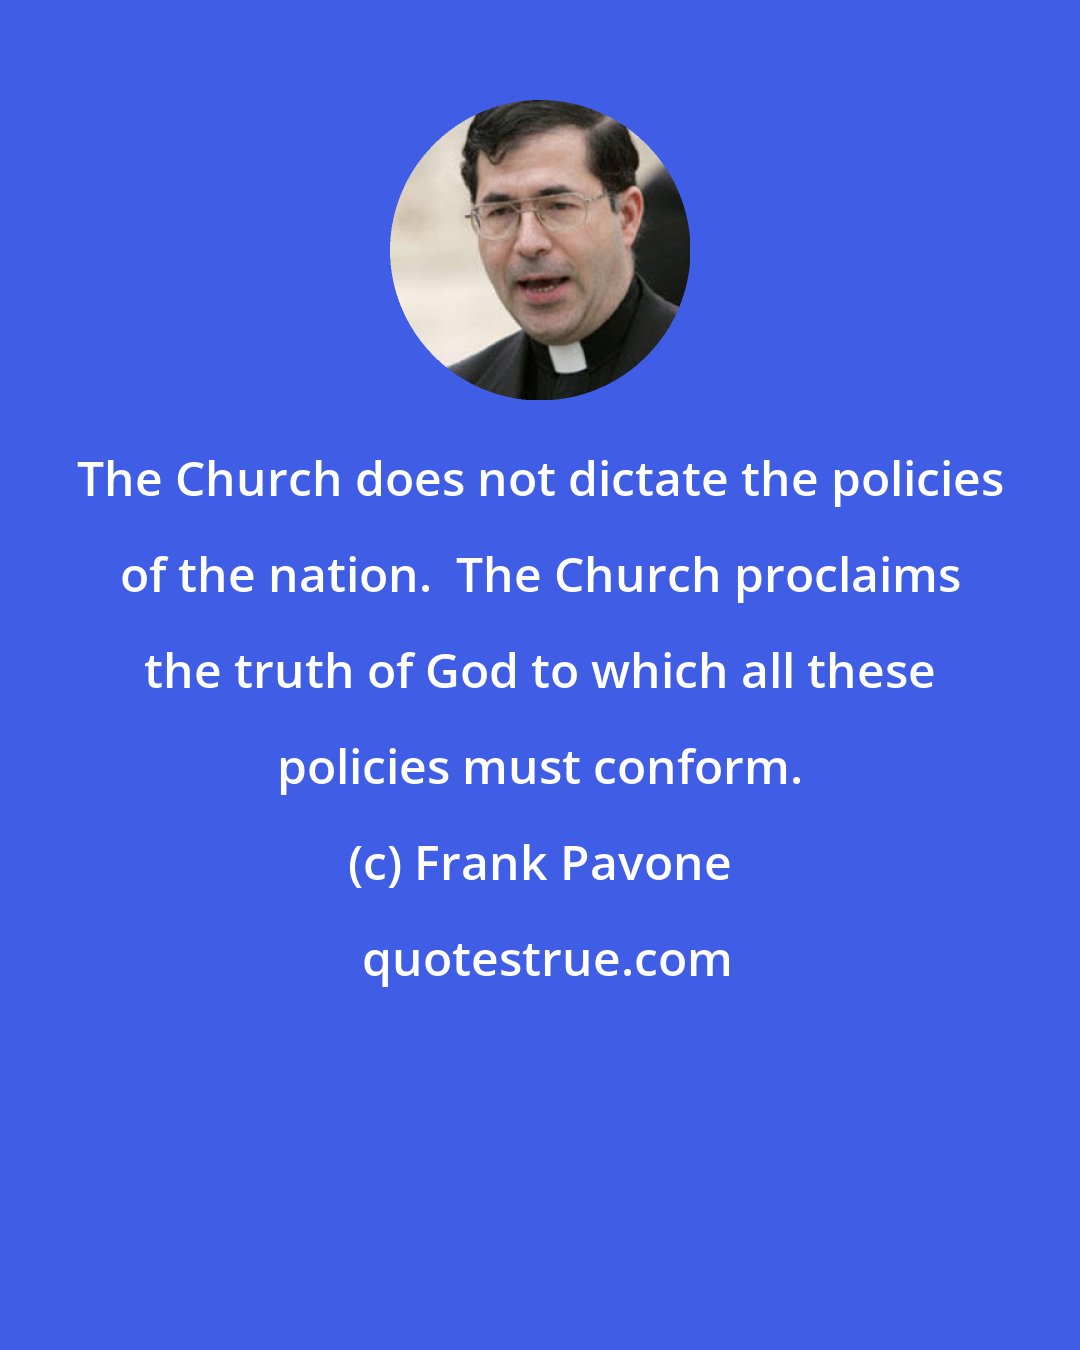 Frank Pavone: The Church does not dictate the policies of the nation.  The Church proclaims the truth of God to which all these policies must conform.